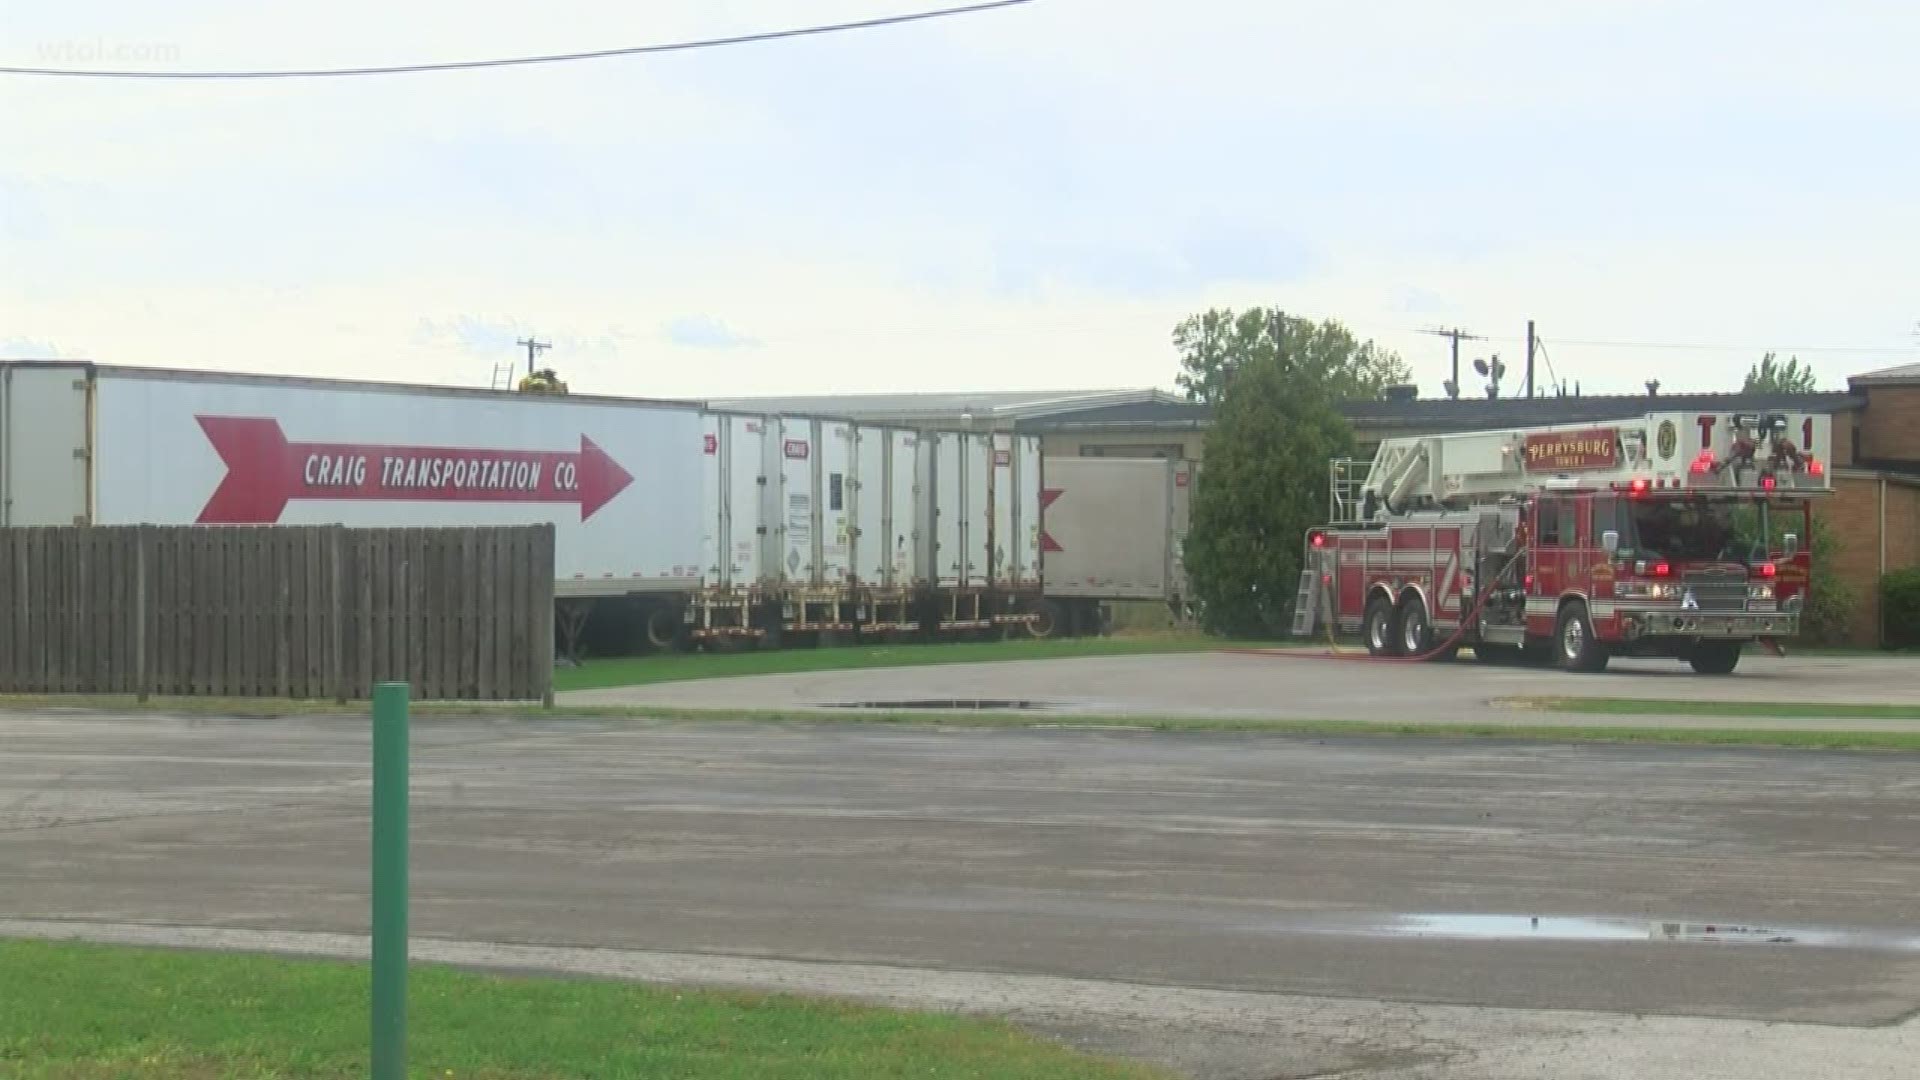 Flames broke out in the industrial area Saturday afternoon.